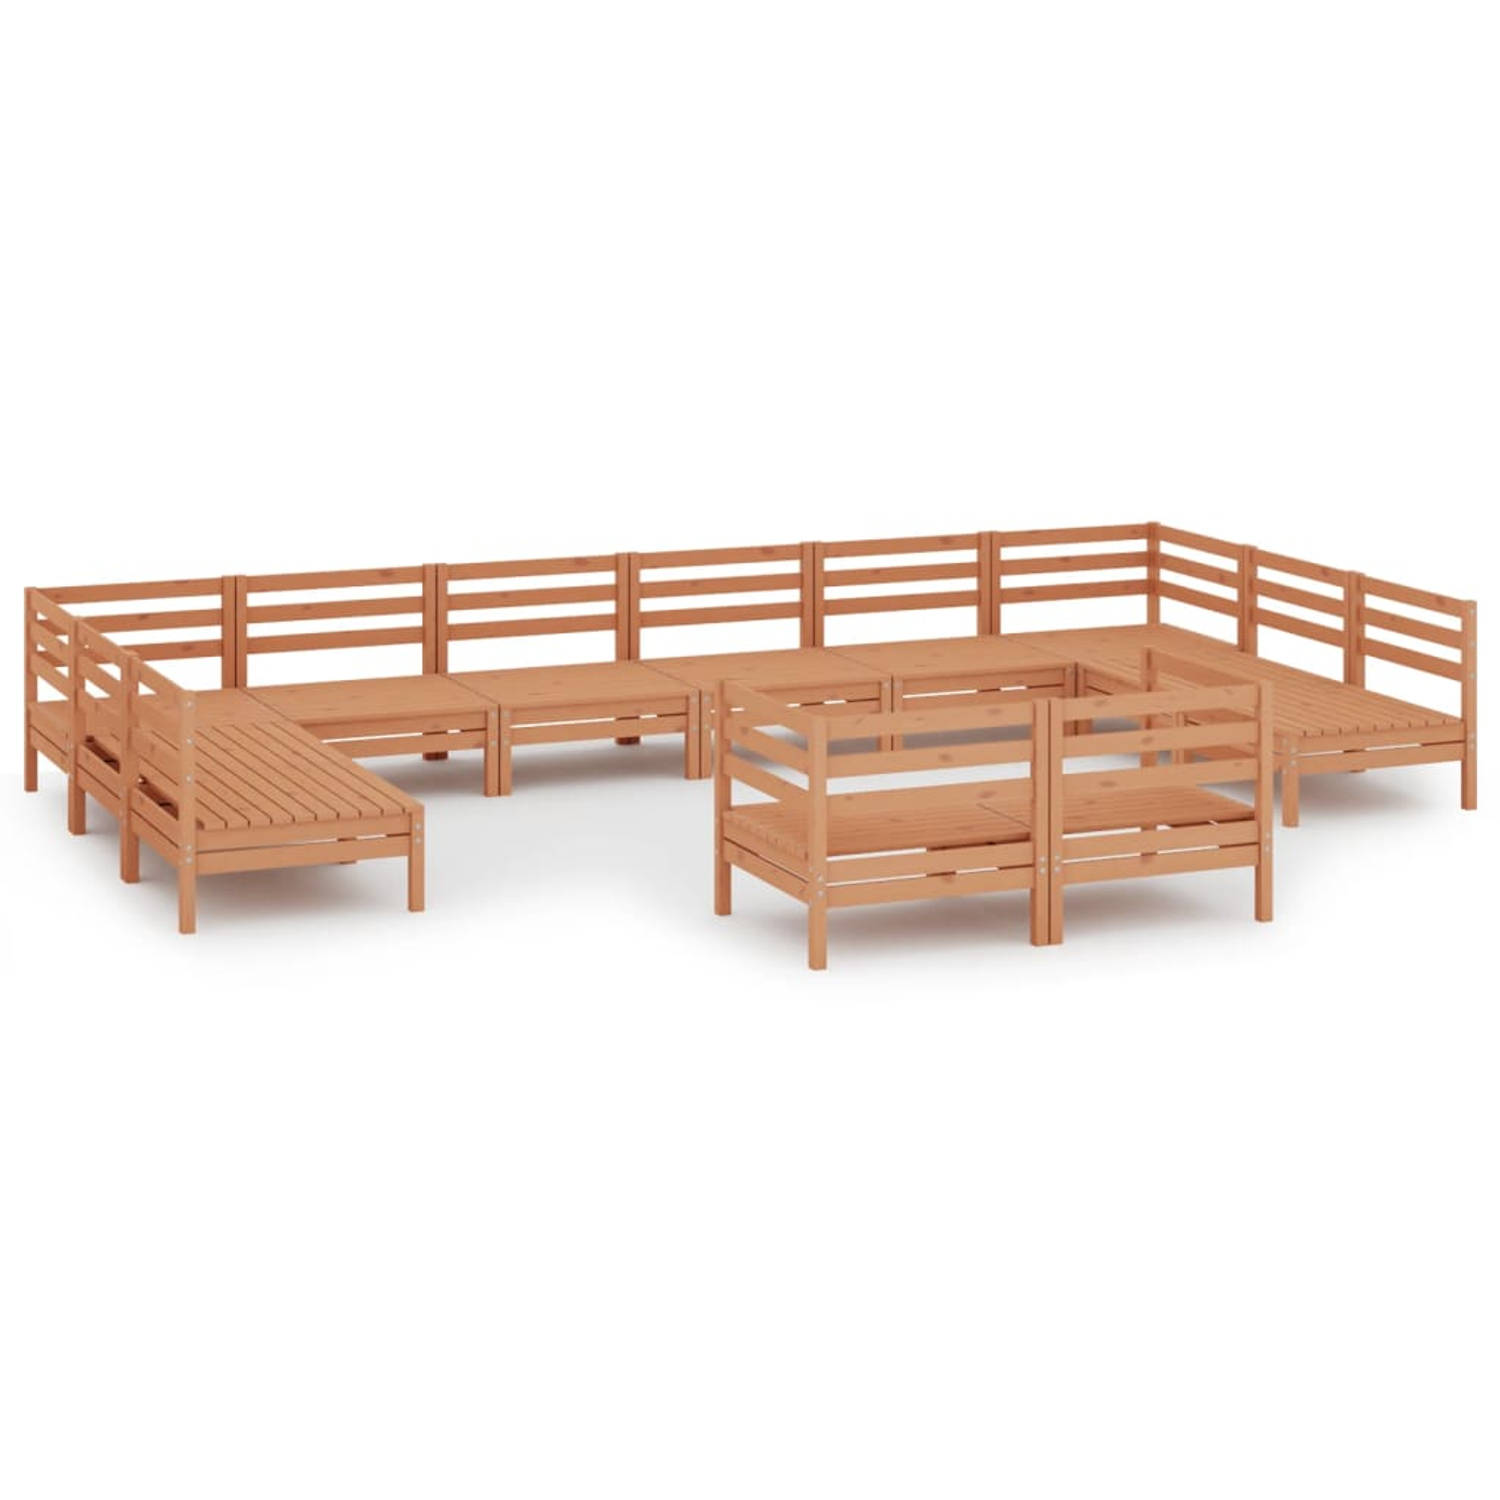 The Living Store 12-delige Loungeset massief grenenhout honingbruin - Tuinset